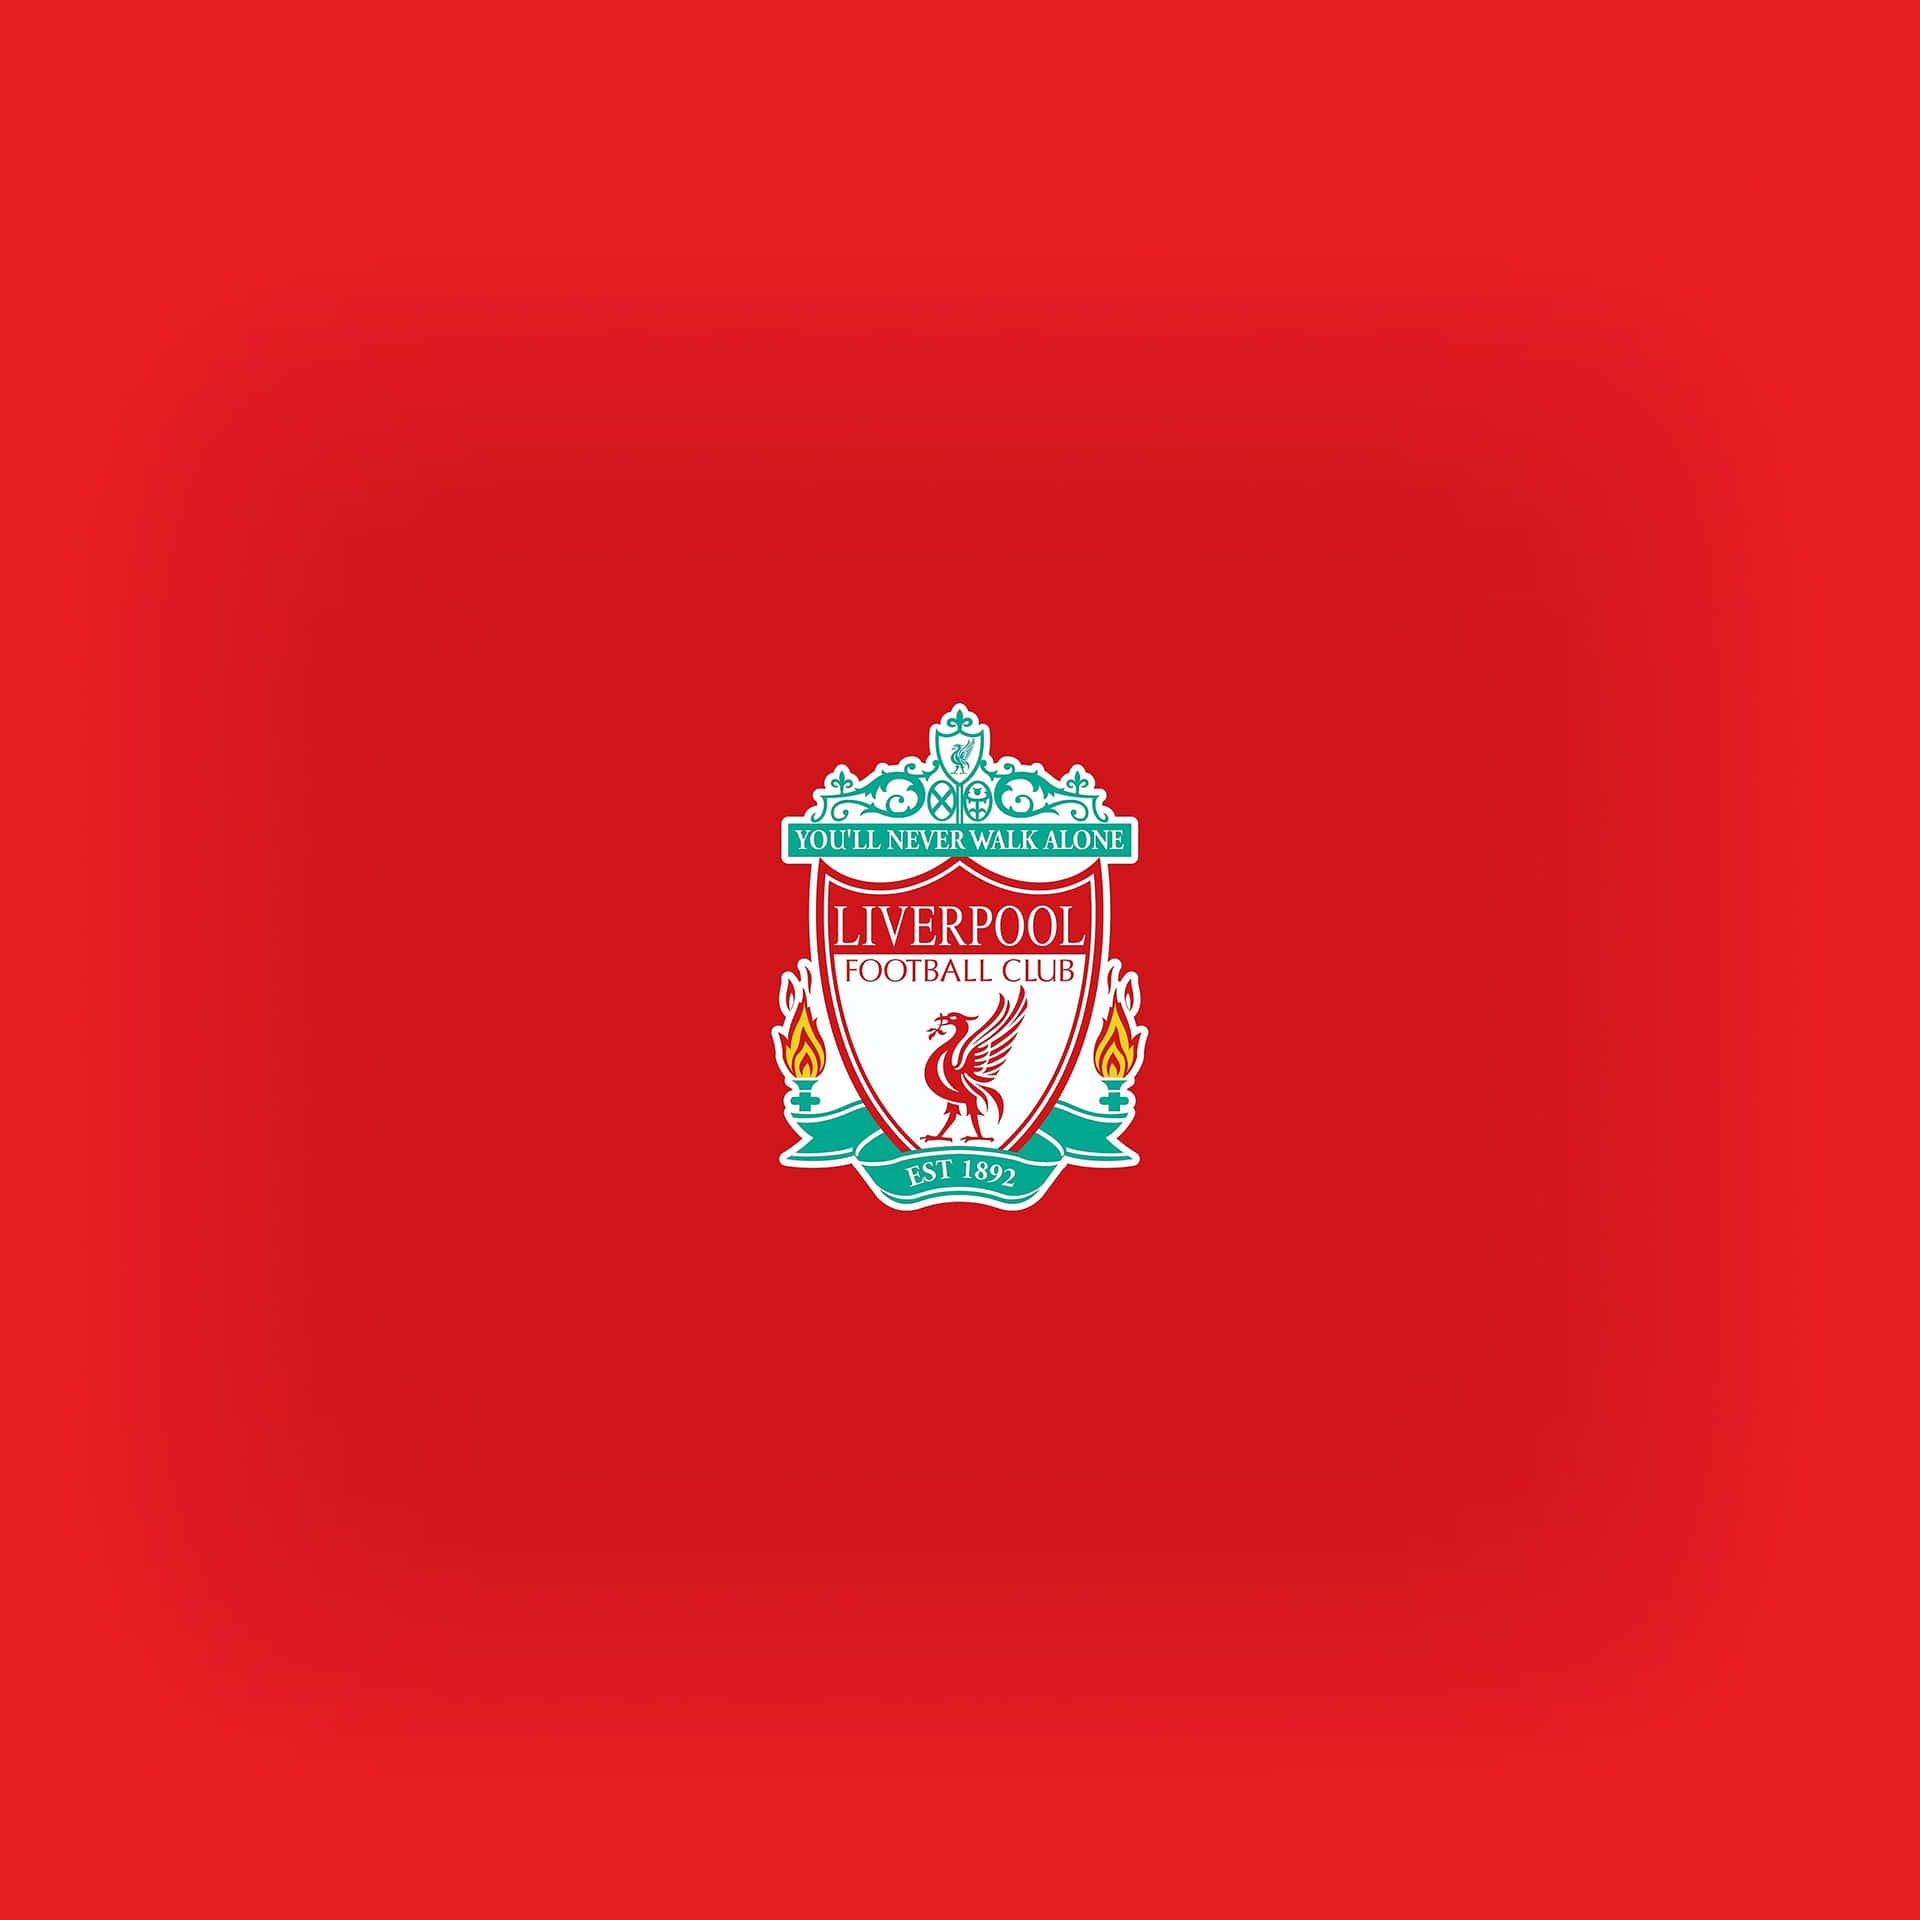 Power and Pride of Reds - The Liverpool FC Logo Wallpaper